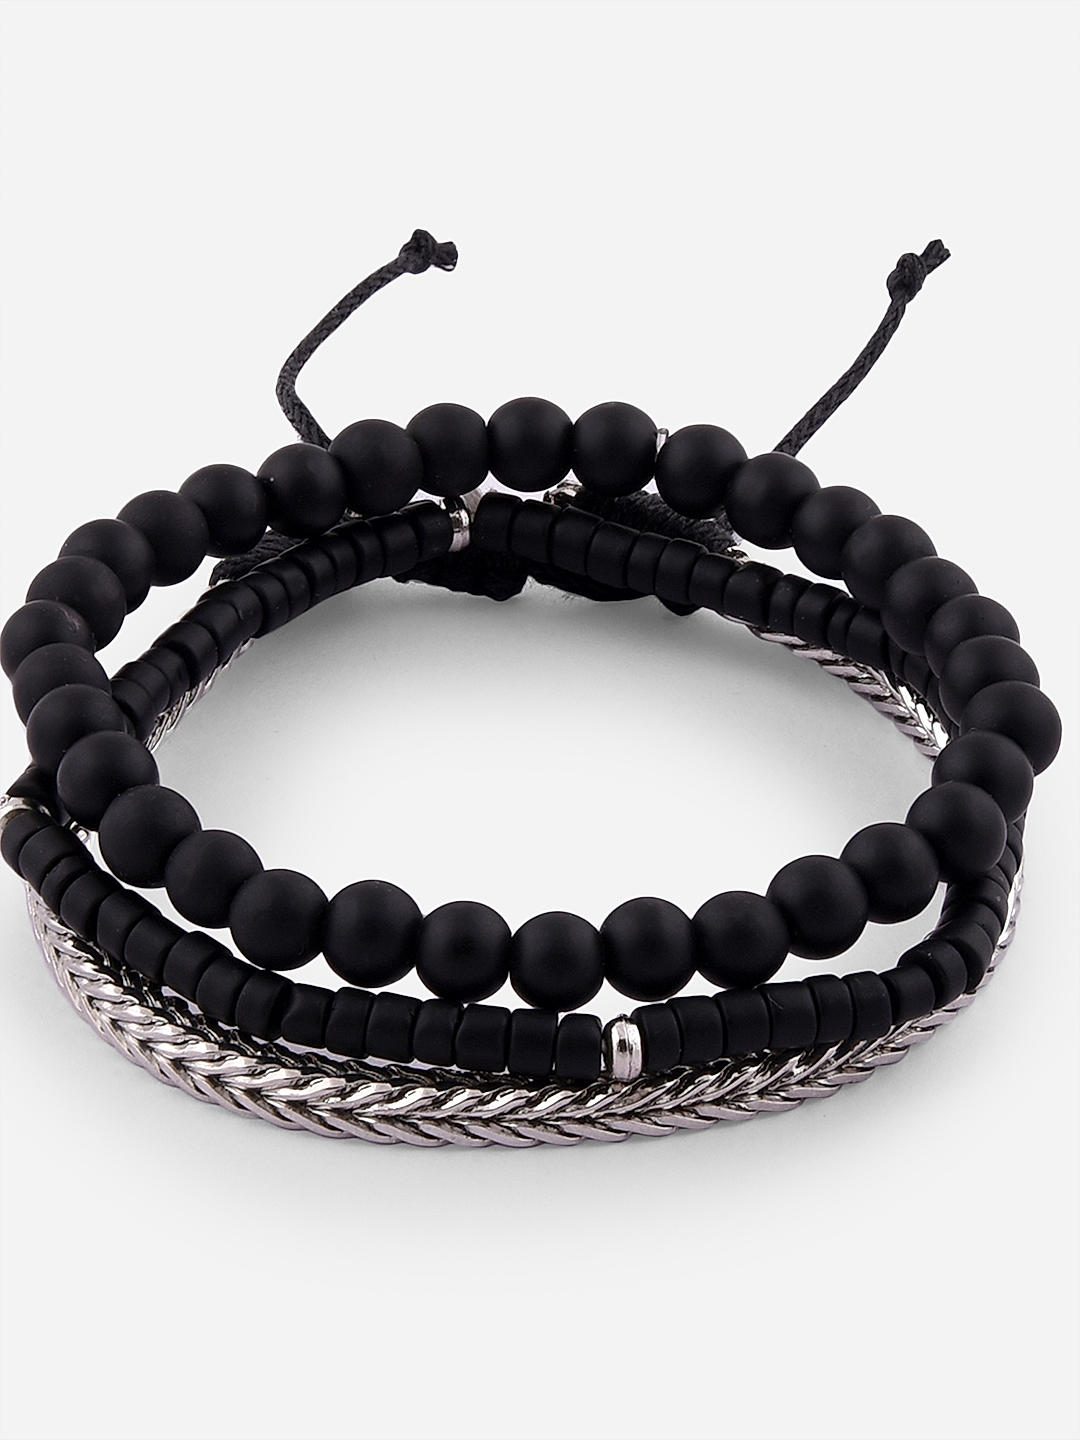 Discover Beautiful Stacking Bracelets